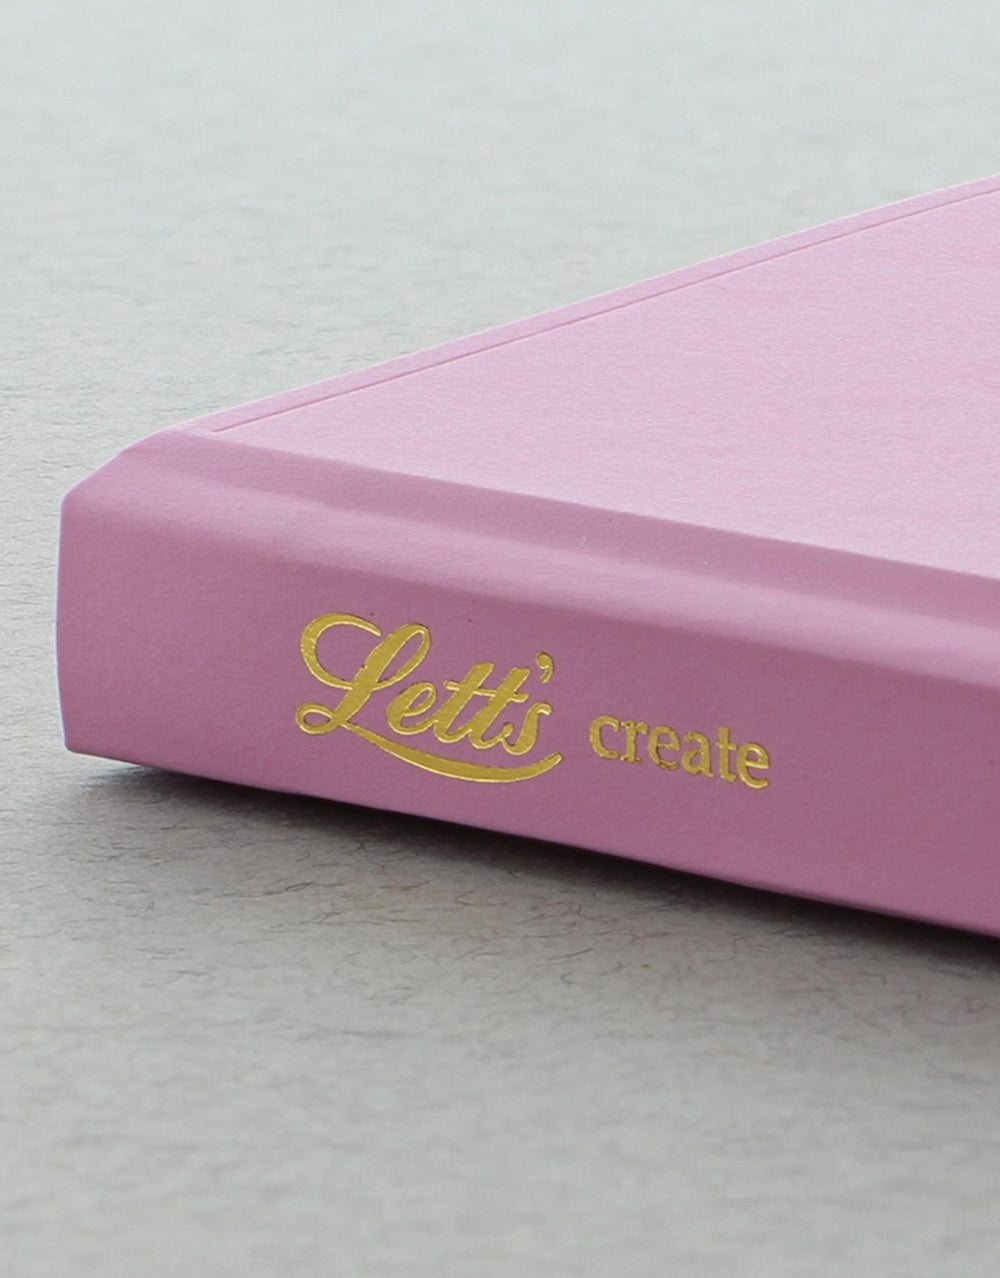 Icon Book Plain Notebook Pink#colour_pink